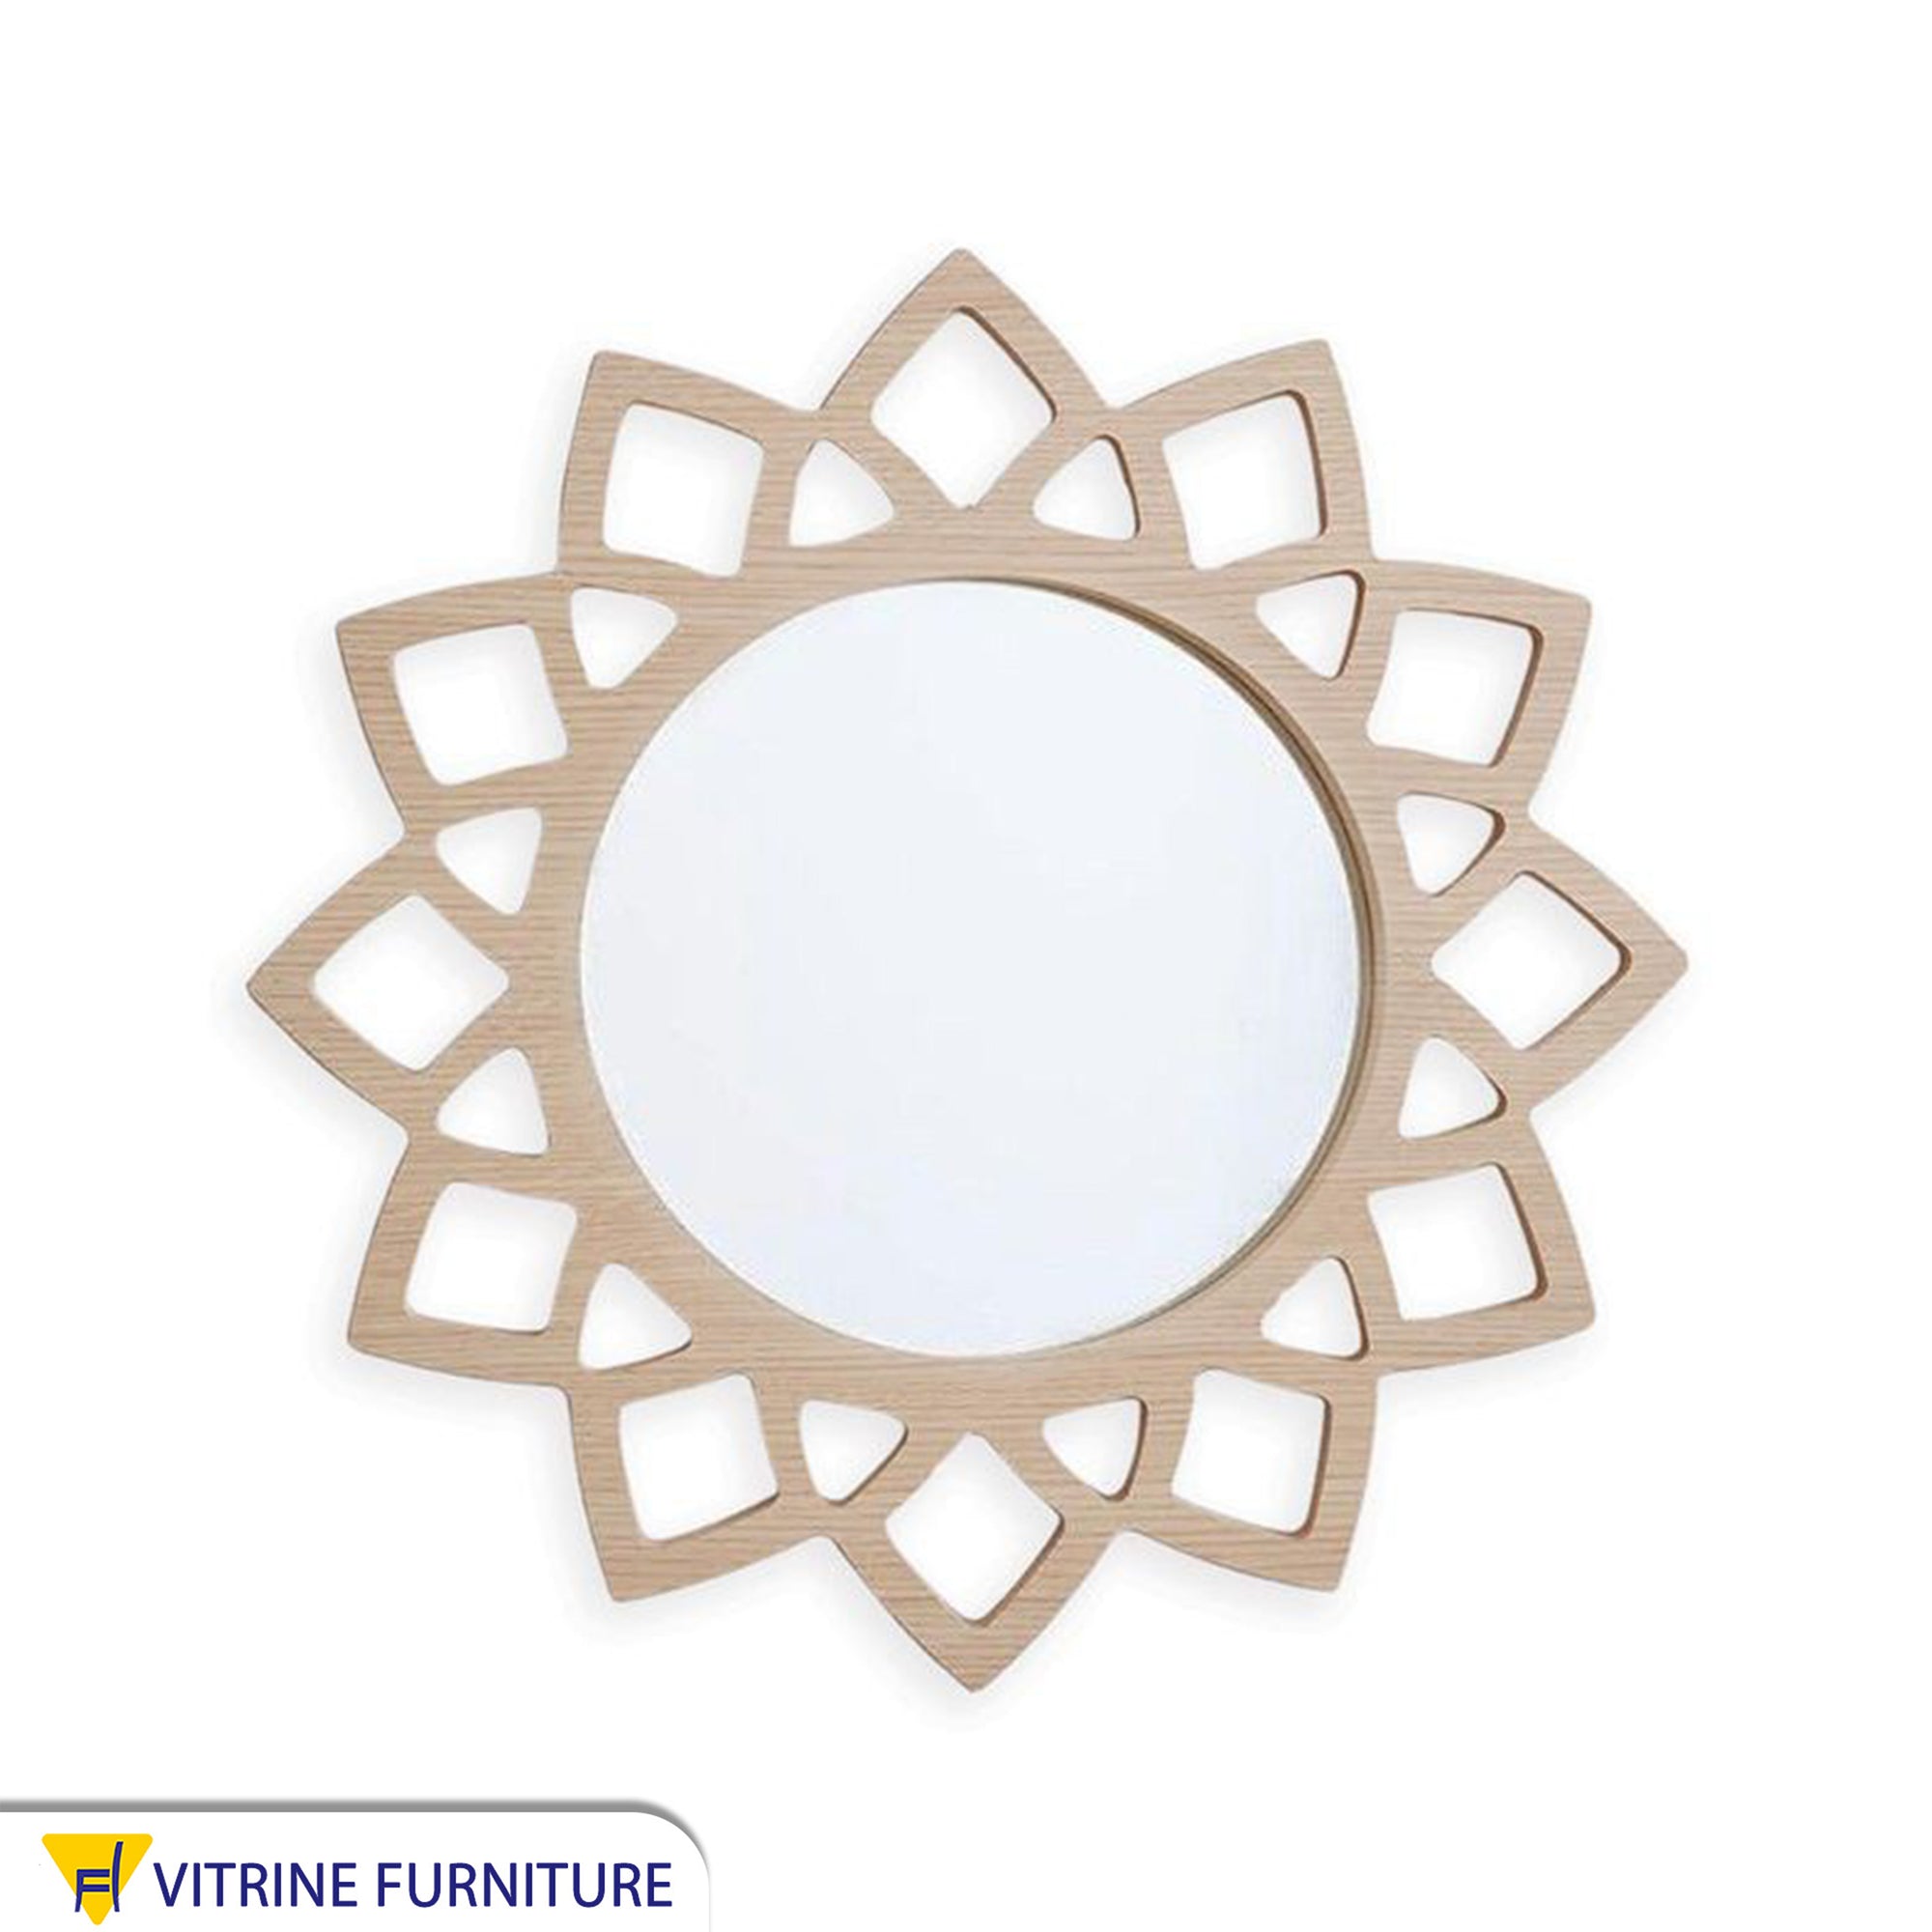 Mirror with a circular, hollowed-out wooden frame